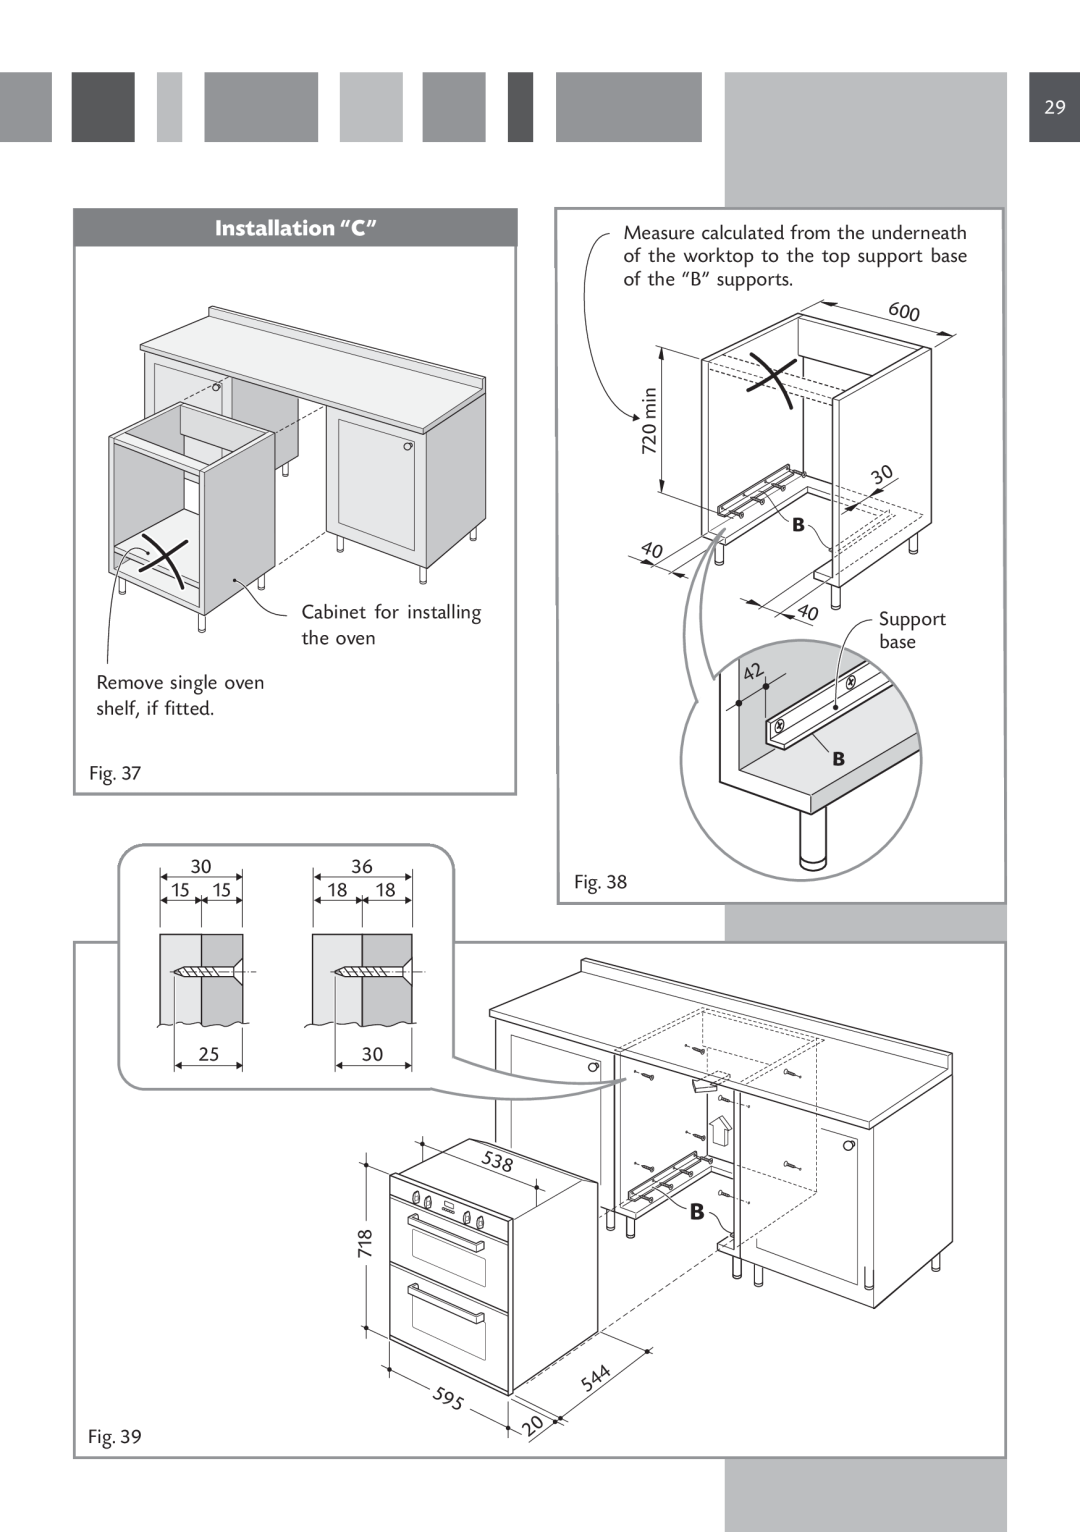 CDA DC730 manual Installation “C”, Cabinet for installing, Support 